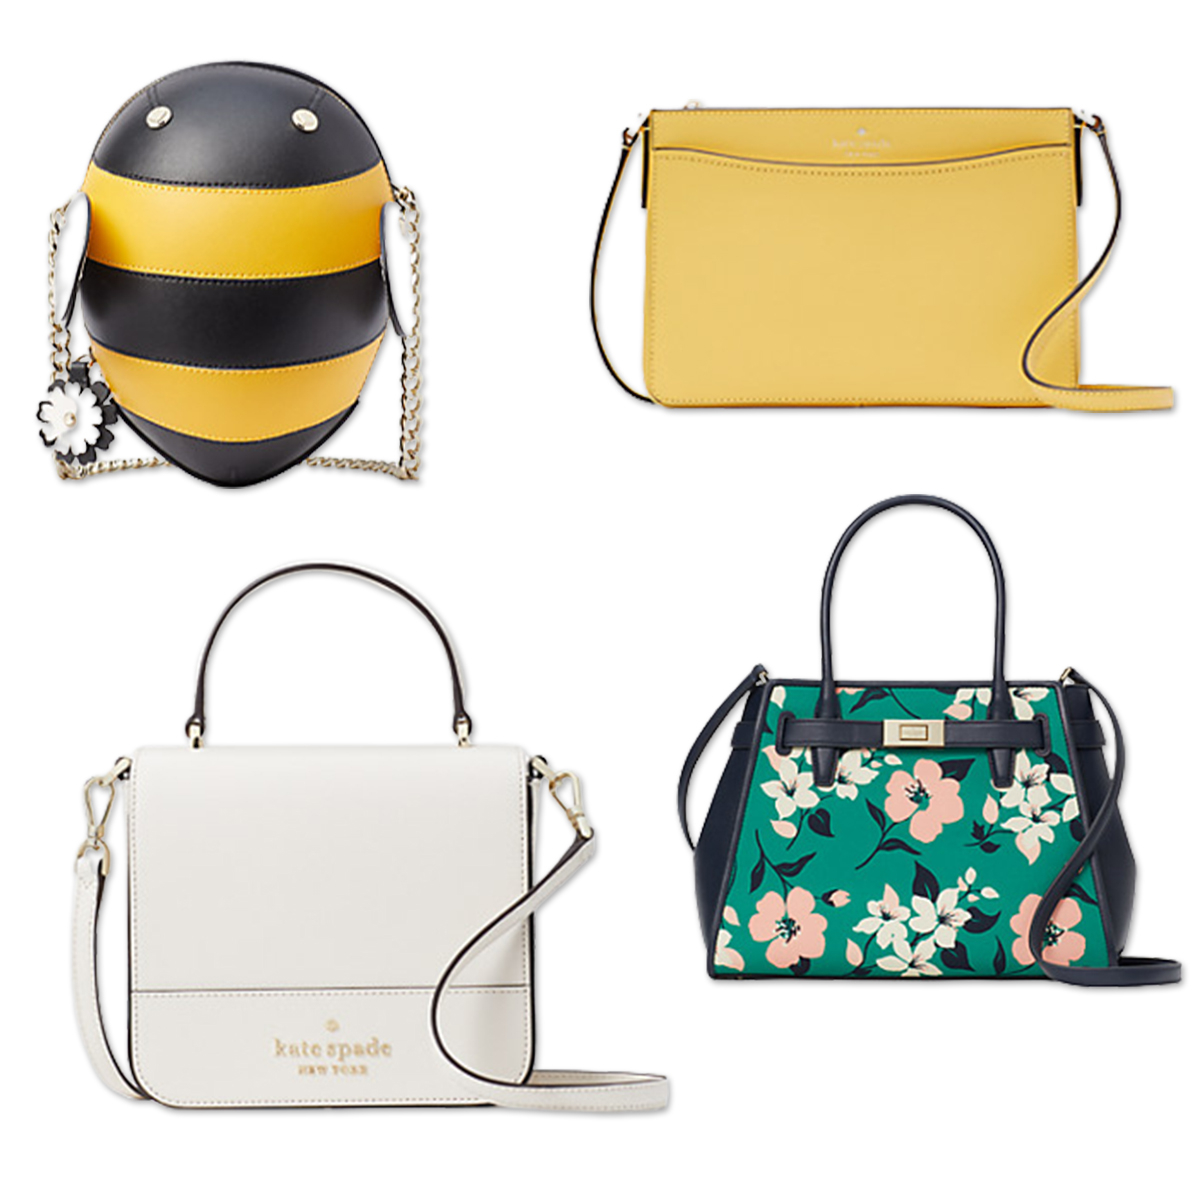 Kate Spade Outlet sale: Up to 70% off bags, boots, jewelry, more